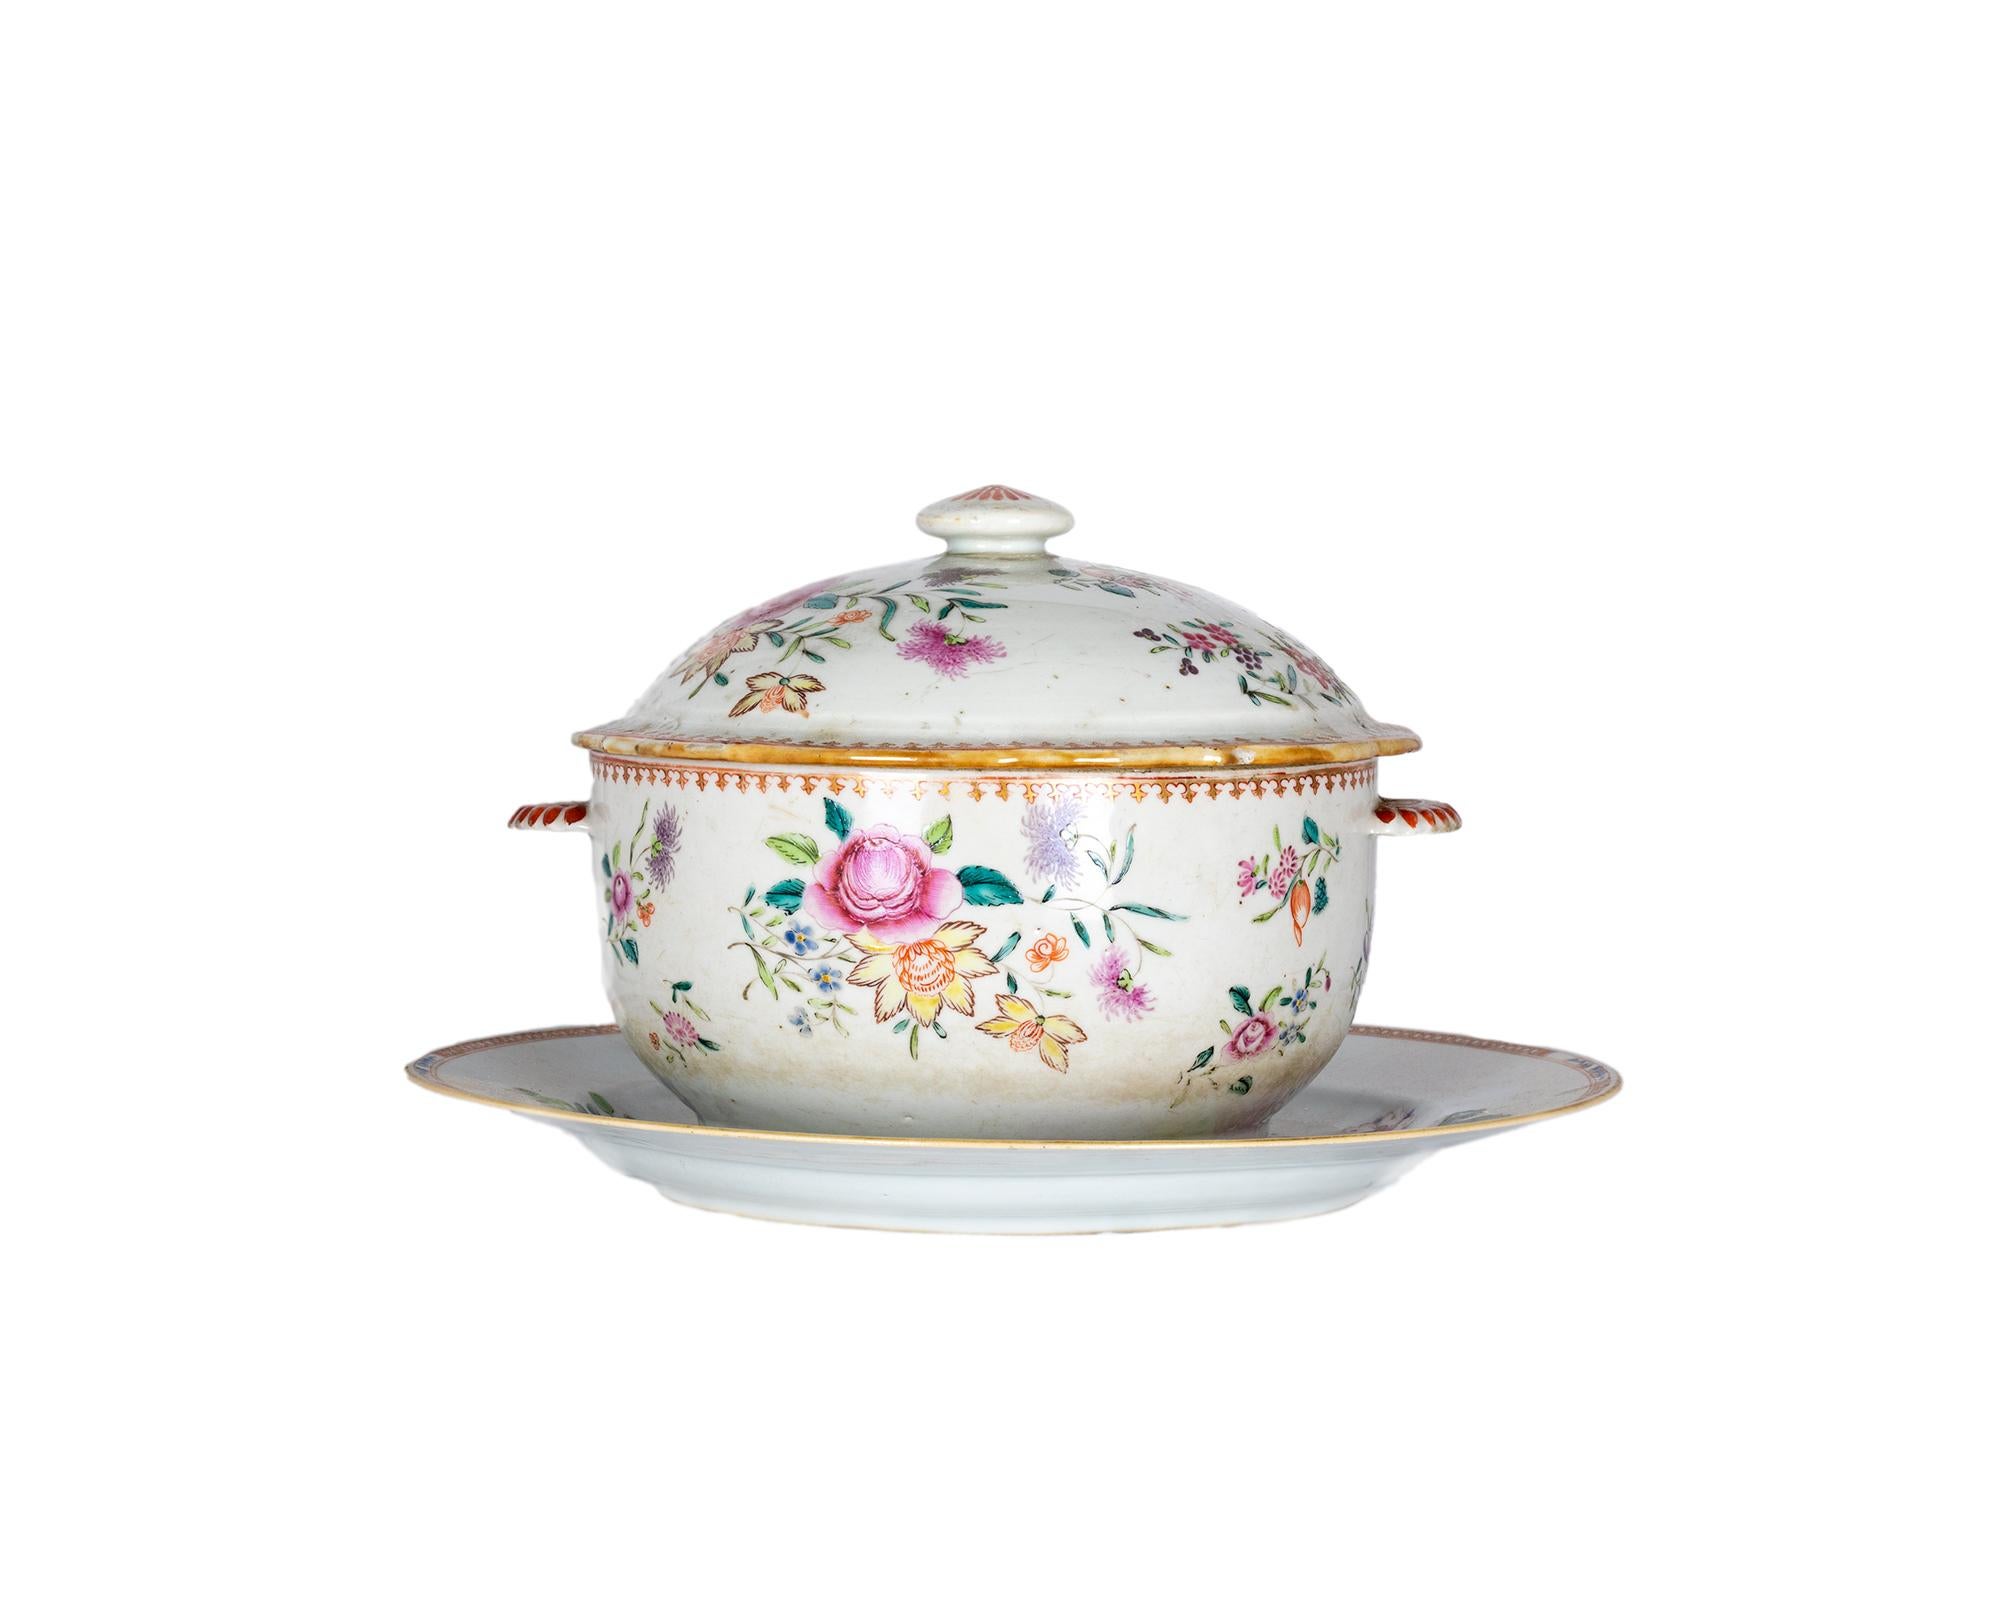 Tureen and round platter of the Companhia da Índia Portuguesa da Família Rosa in white porcelain, red and pink details, floral motif, decoration depicting a garden with peonies and other flowers and wings with coral relief.

Diameter: 
height tureen